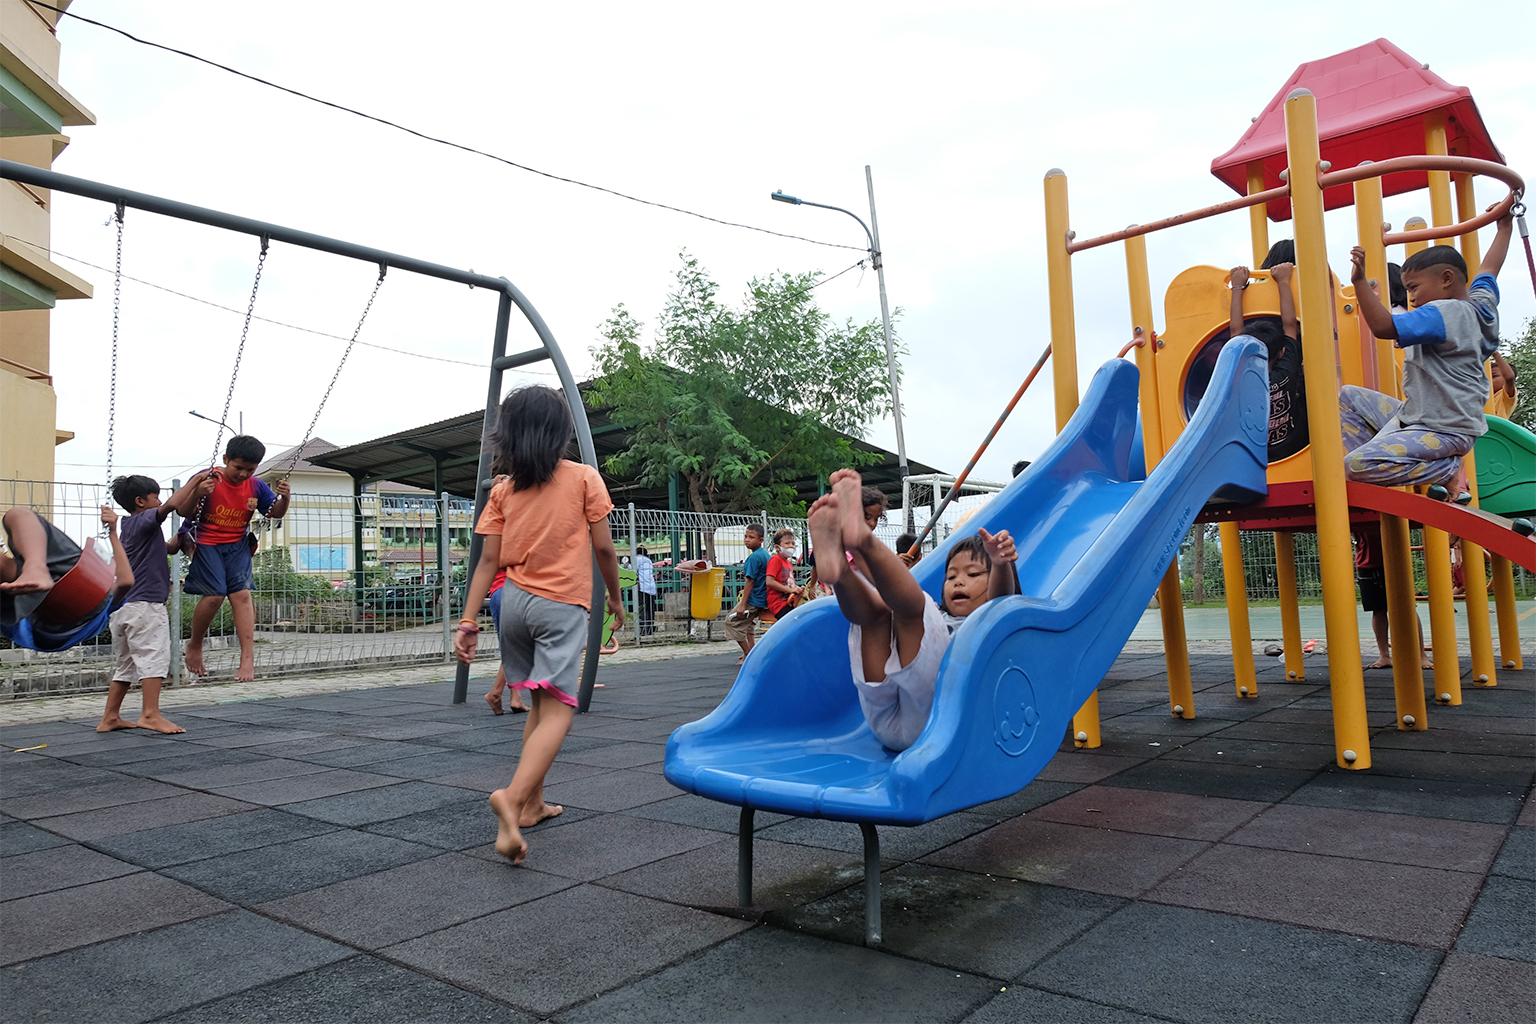 Children of Rusunawa Marunda play at the the child-friendly public space.